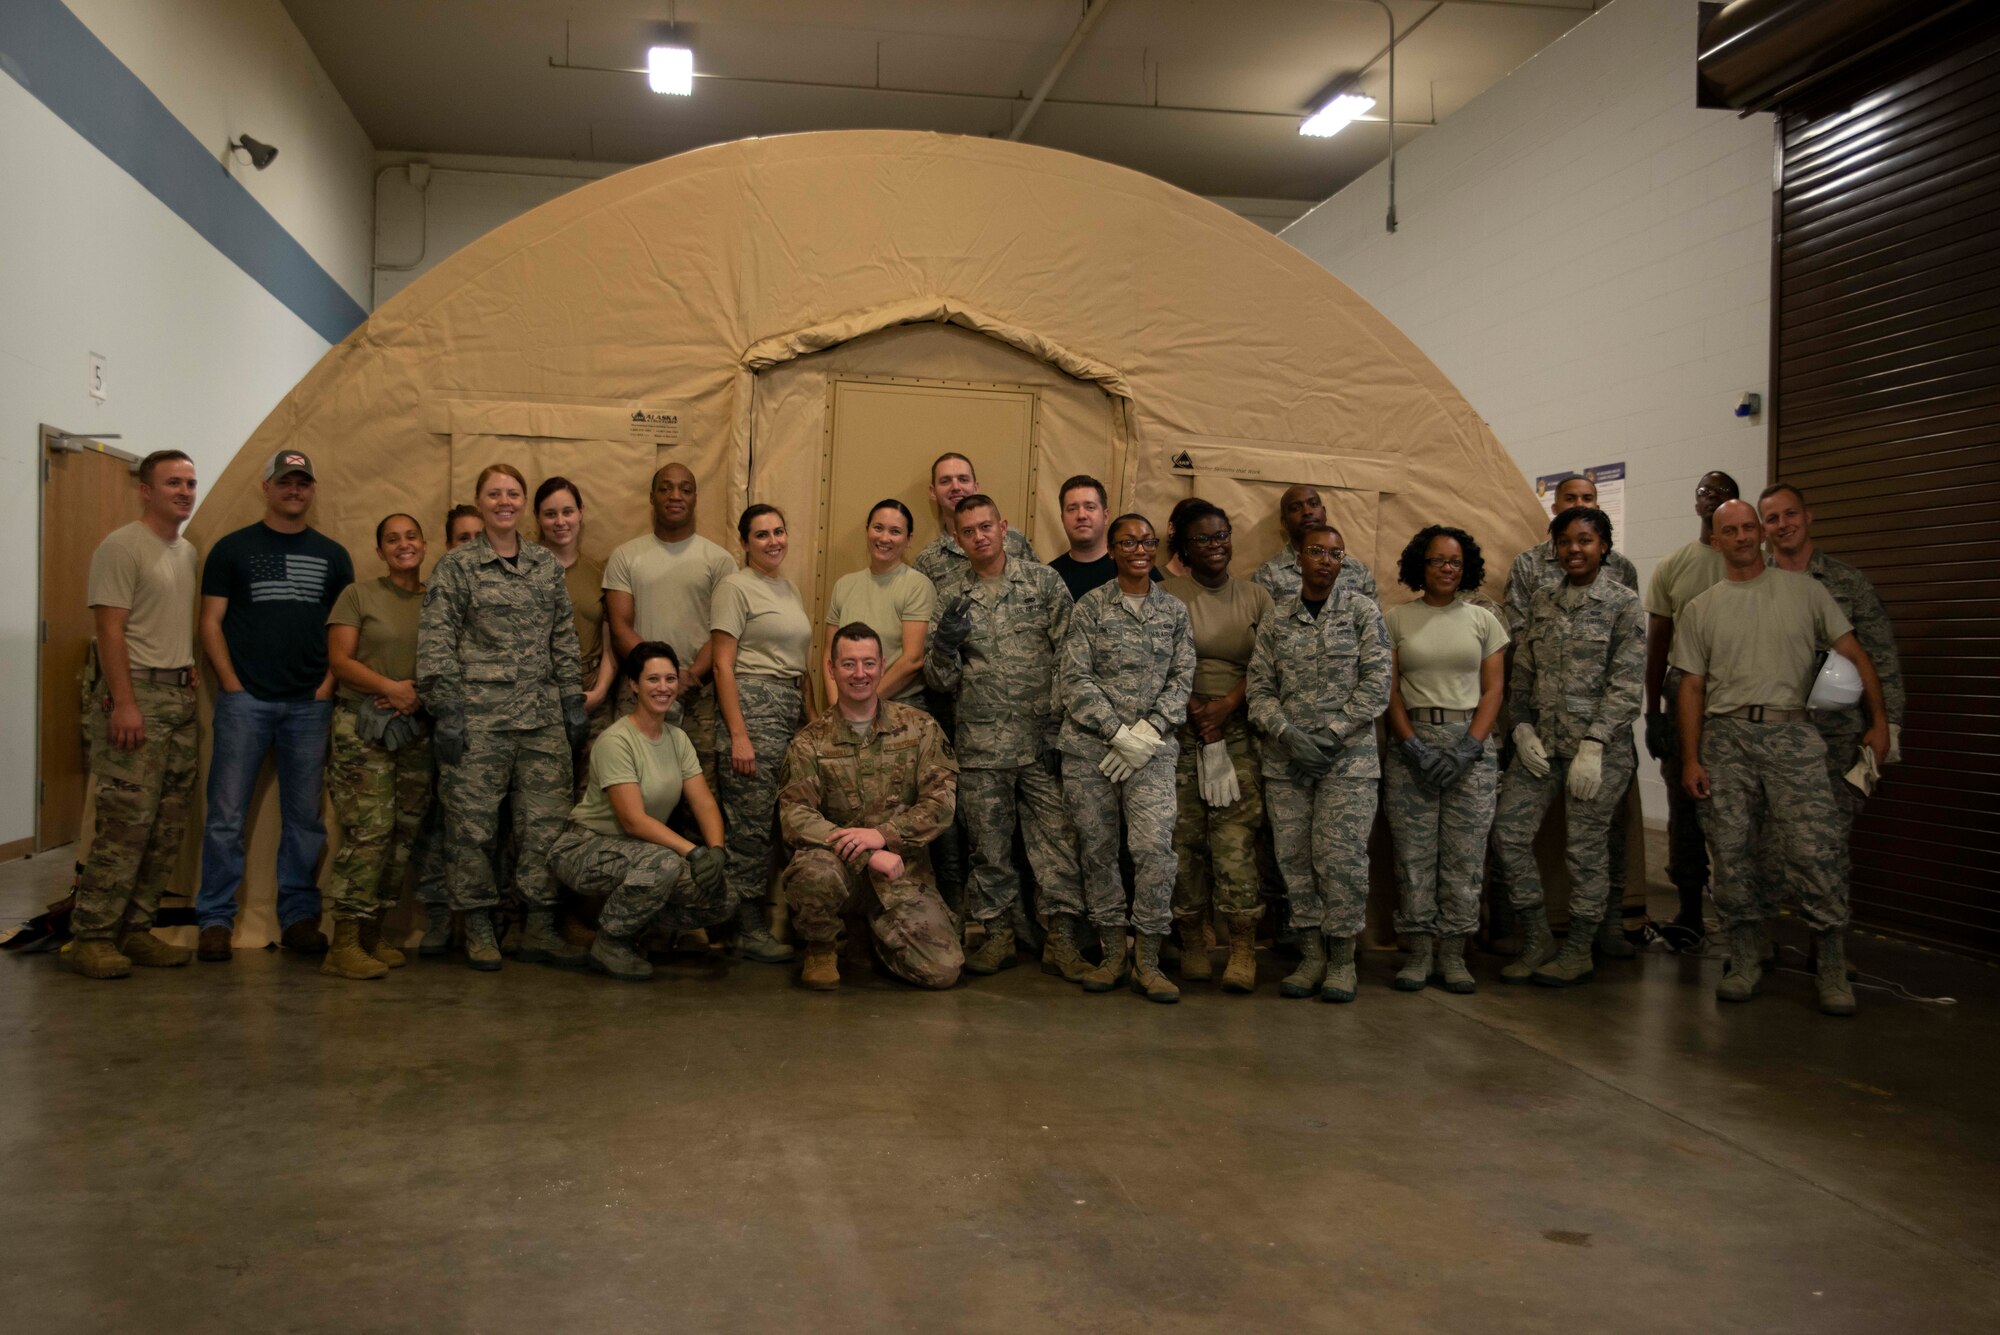 Members of the 913th Force Support Squadron pose for a group photo after completing tent build operations at Little Rock Air Force Base, Ark., Oct. 6, 2019. The ability to properly prepare and build a tent is essential for deployment or humanitarian environments. FSS provides the Air Force a range of services, from quality of life programs to combat support operations. (U.S. Air Force Reserve photo by Senior Airman Chase Cannon)